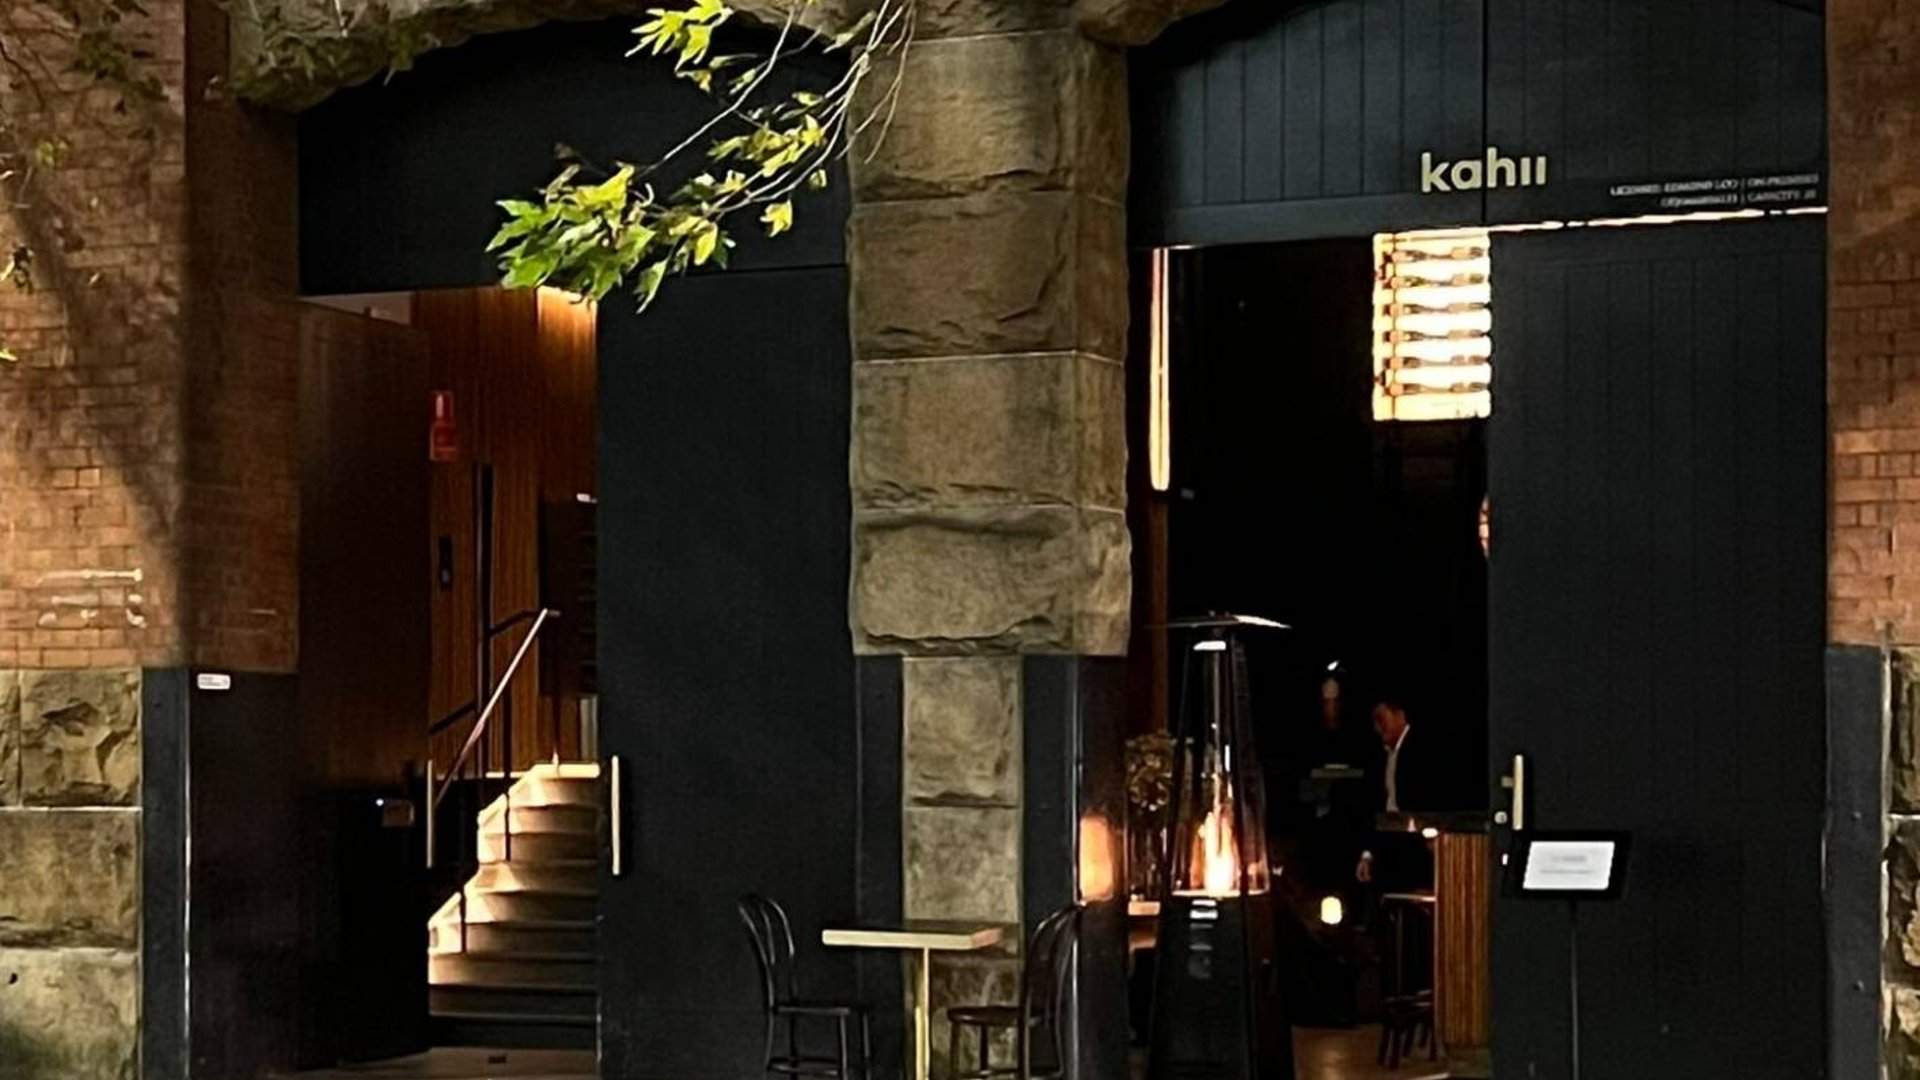 Kahii Kissaten Bistro Is Now a Japanese-Style Cafe by Day and French-Inspired Wine Bar by Night